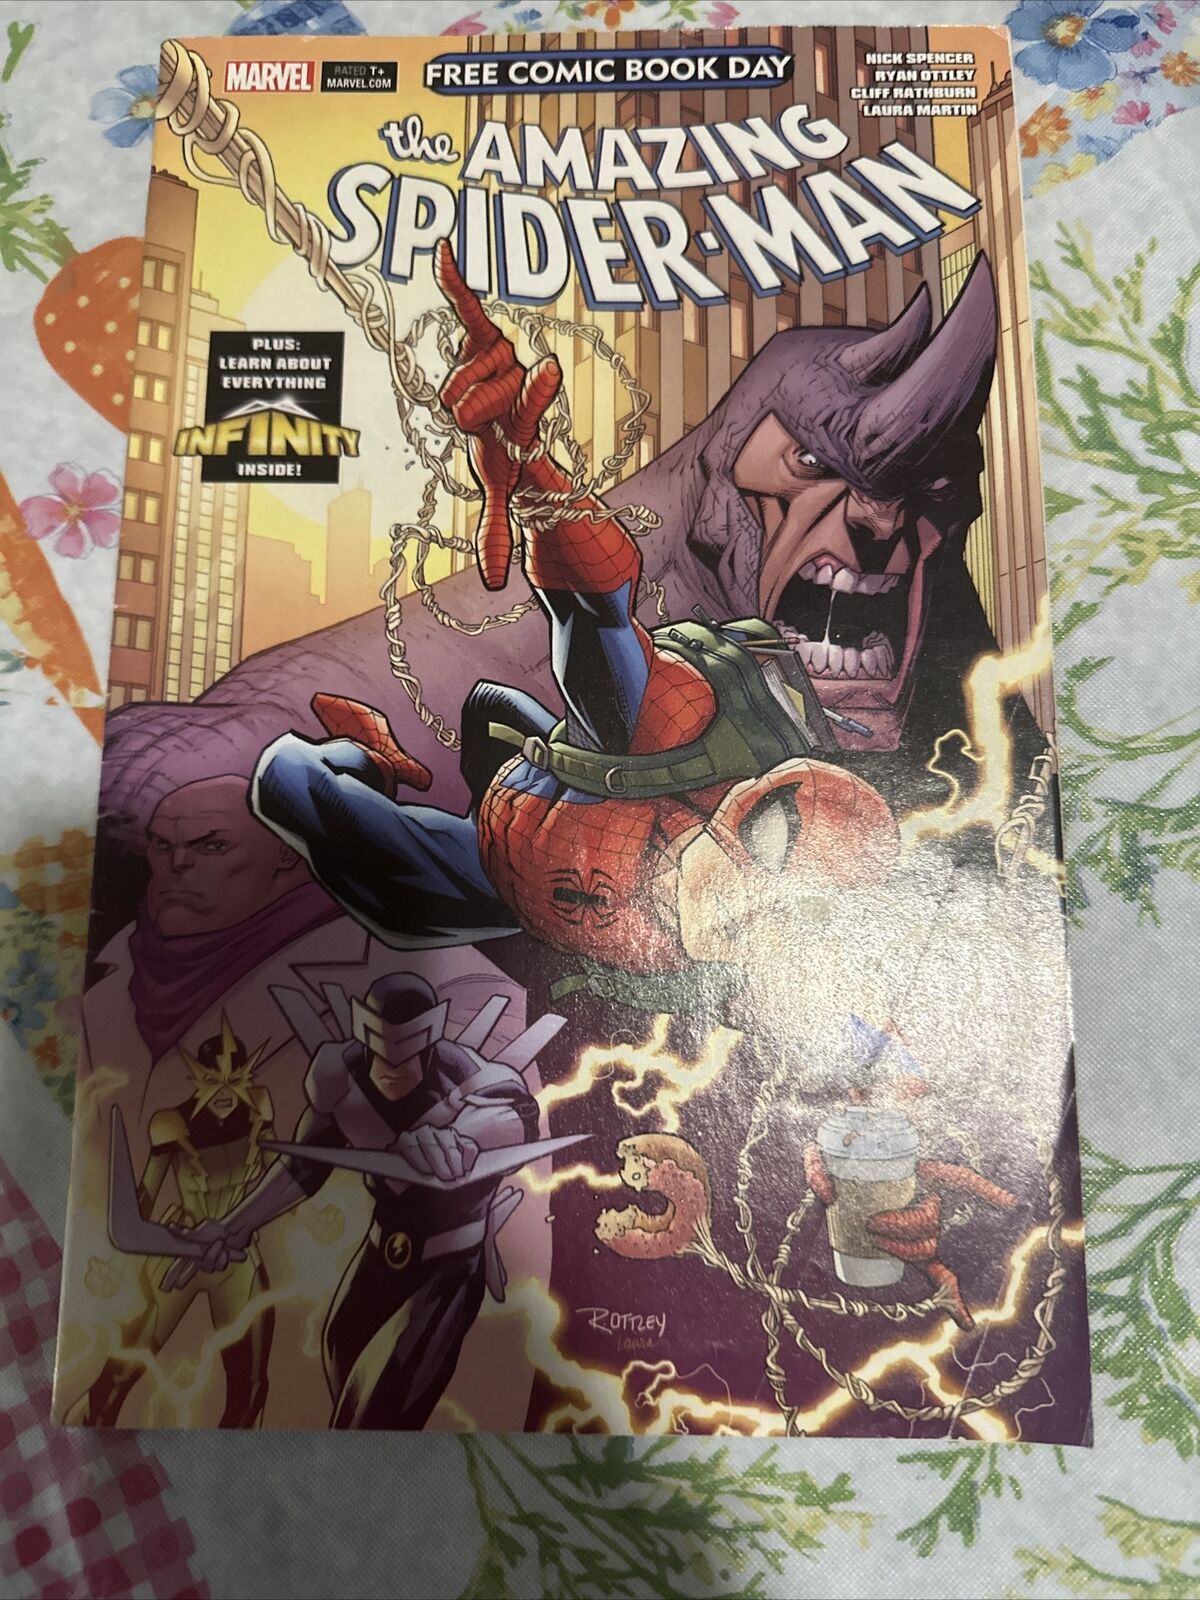 The Amazing Spider-Man Free Comic Book Day 2018